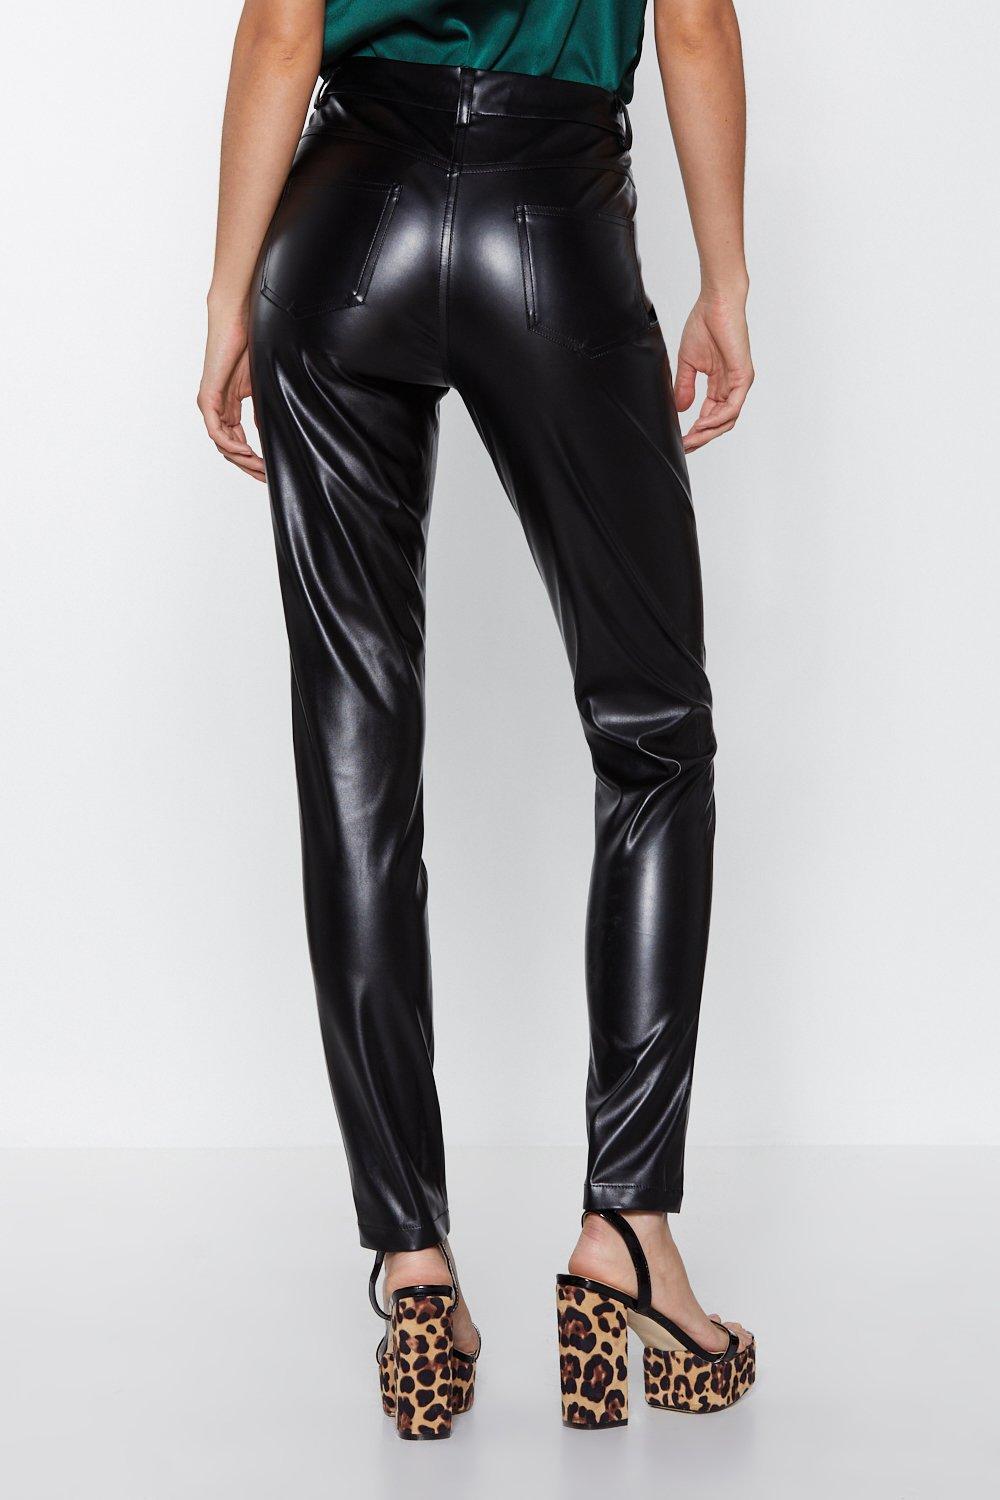 Shine On Faux Leather Pants